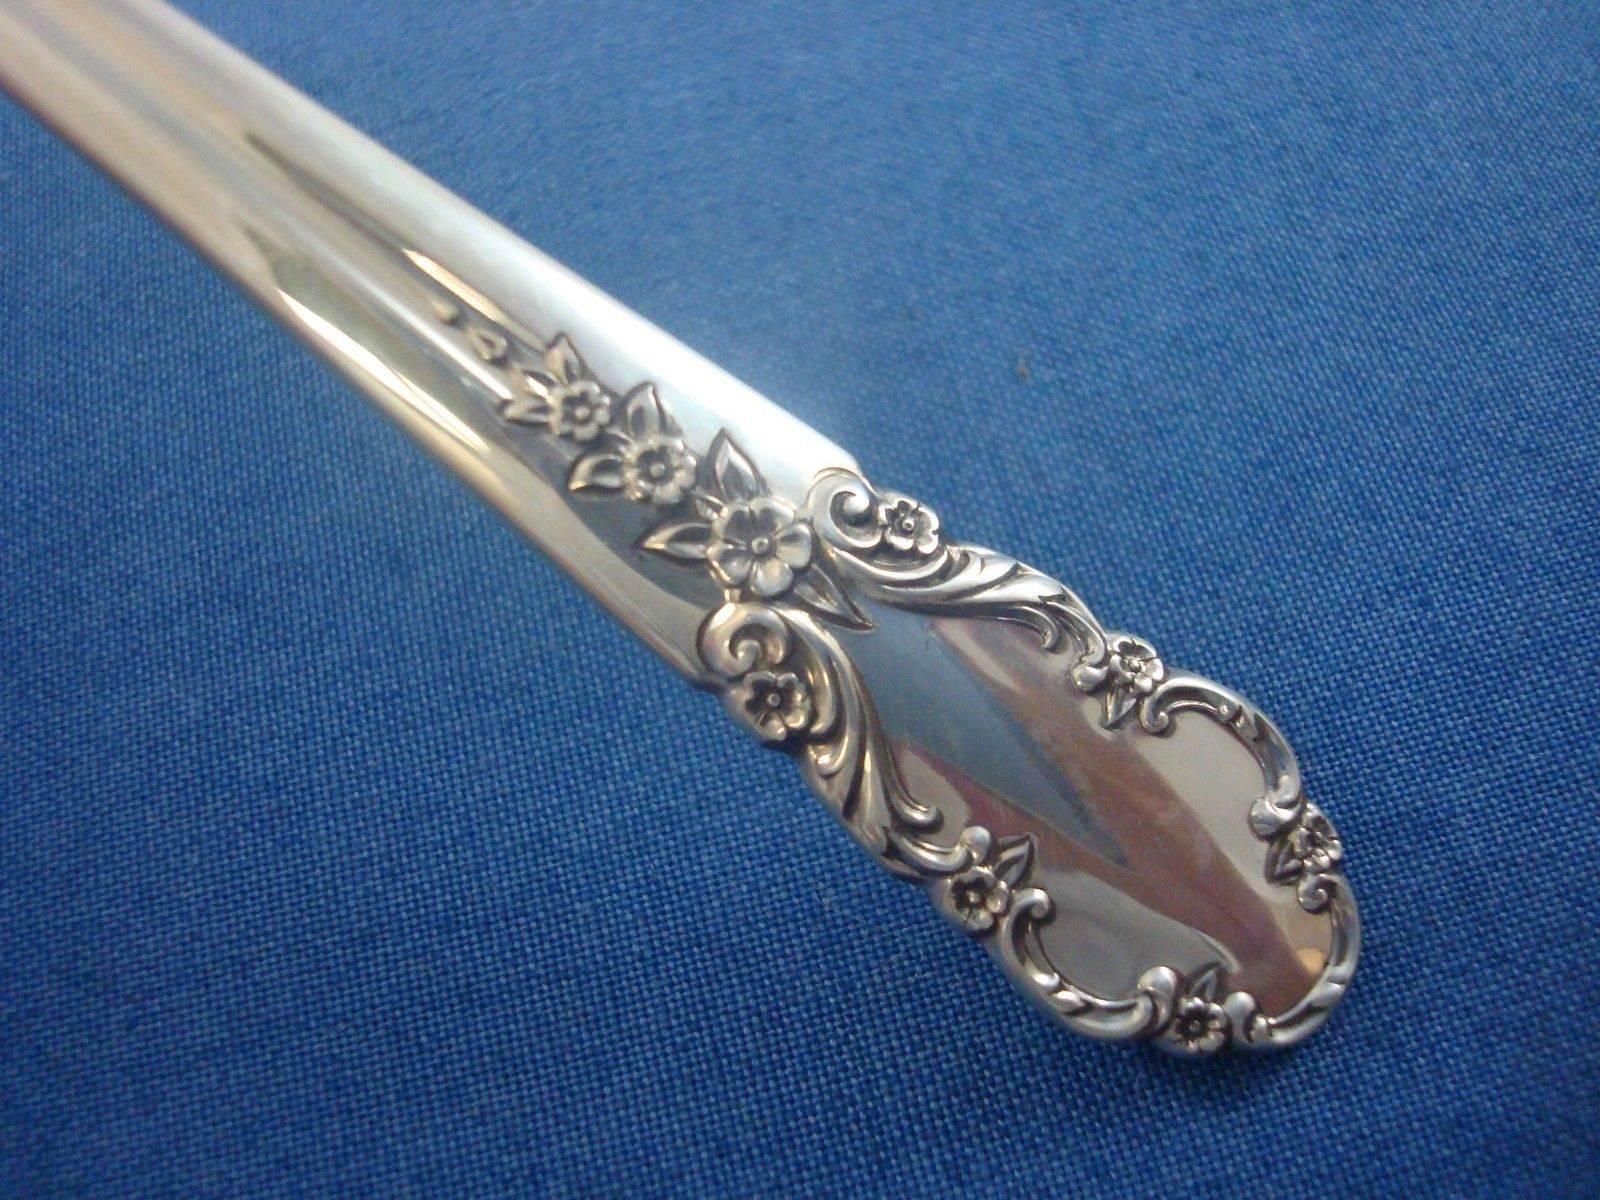 Mid-20th Century Bridal Veil by International Sterling Silver Flatware Set 8 Service 51 Pieces